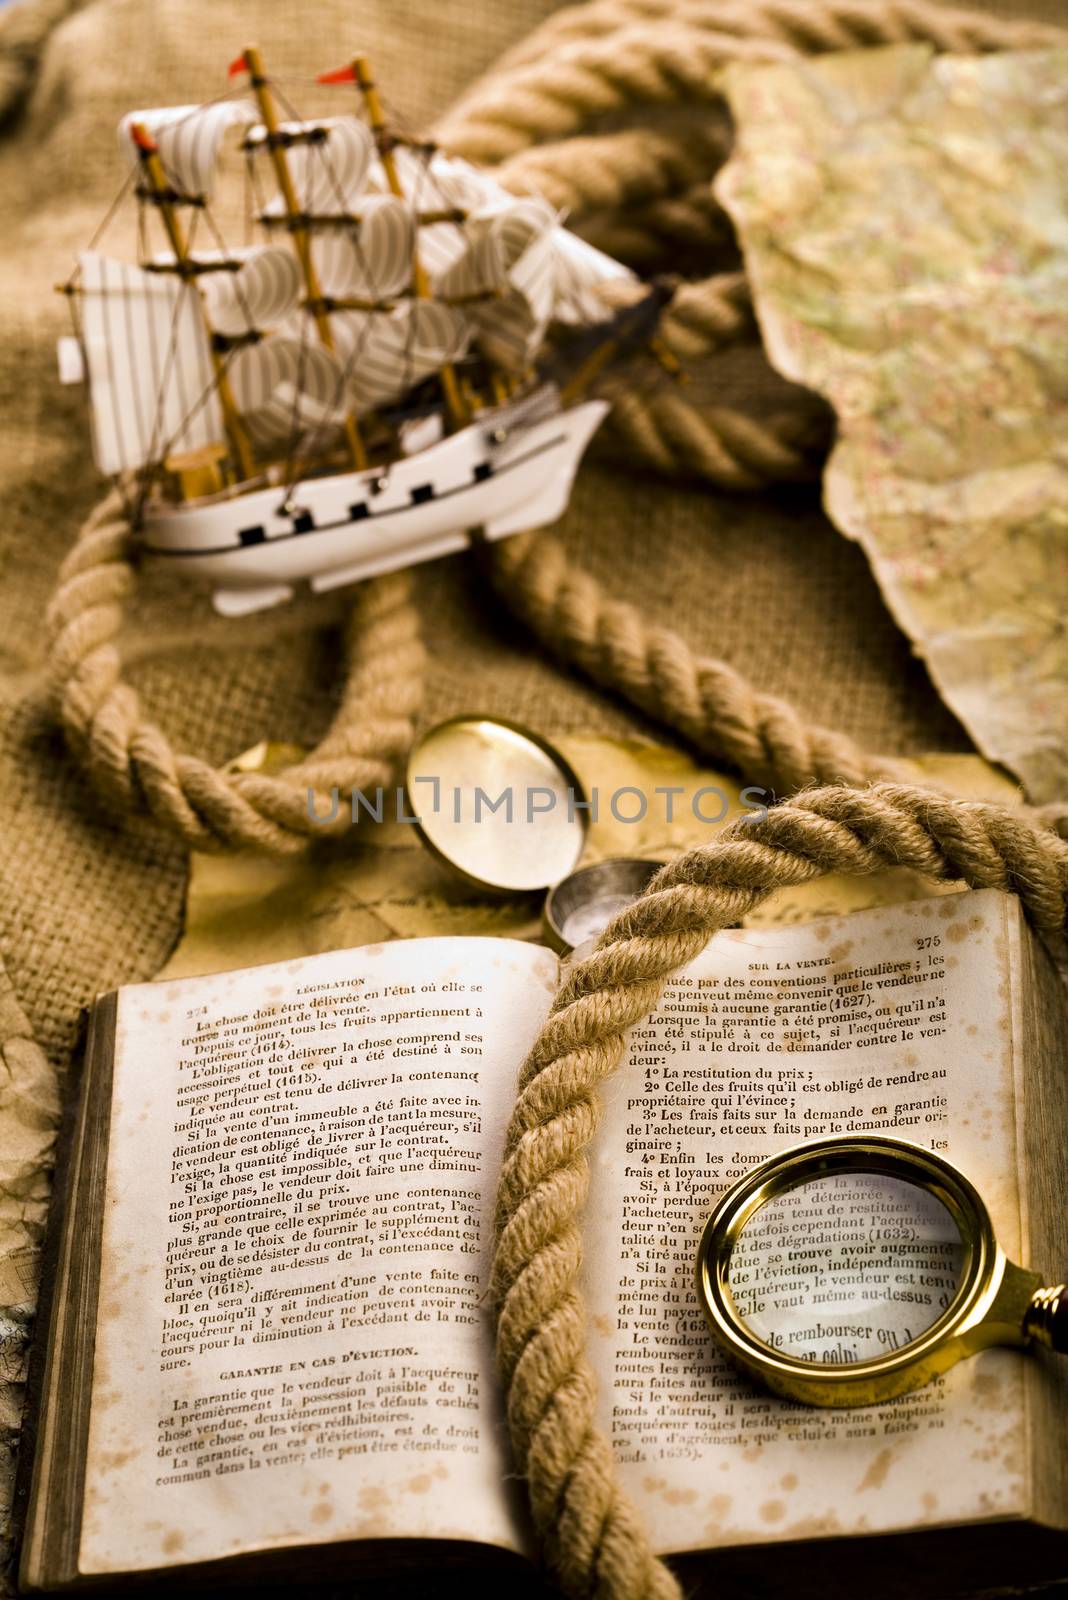 Magnifying glass, Compass and globe, ambient light travel theme by JanPietruszka